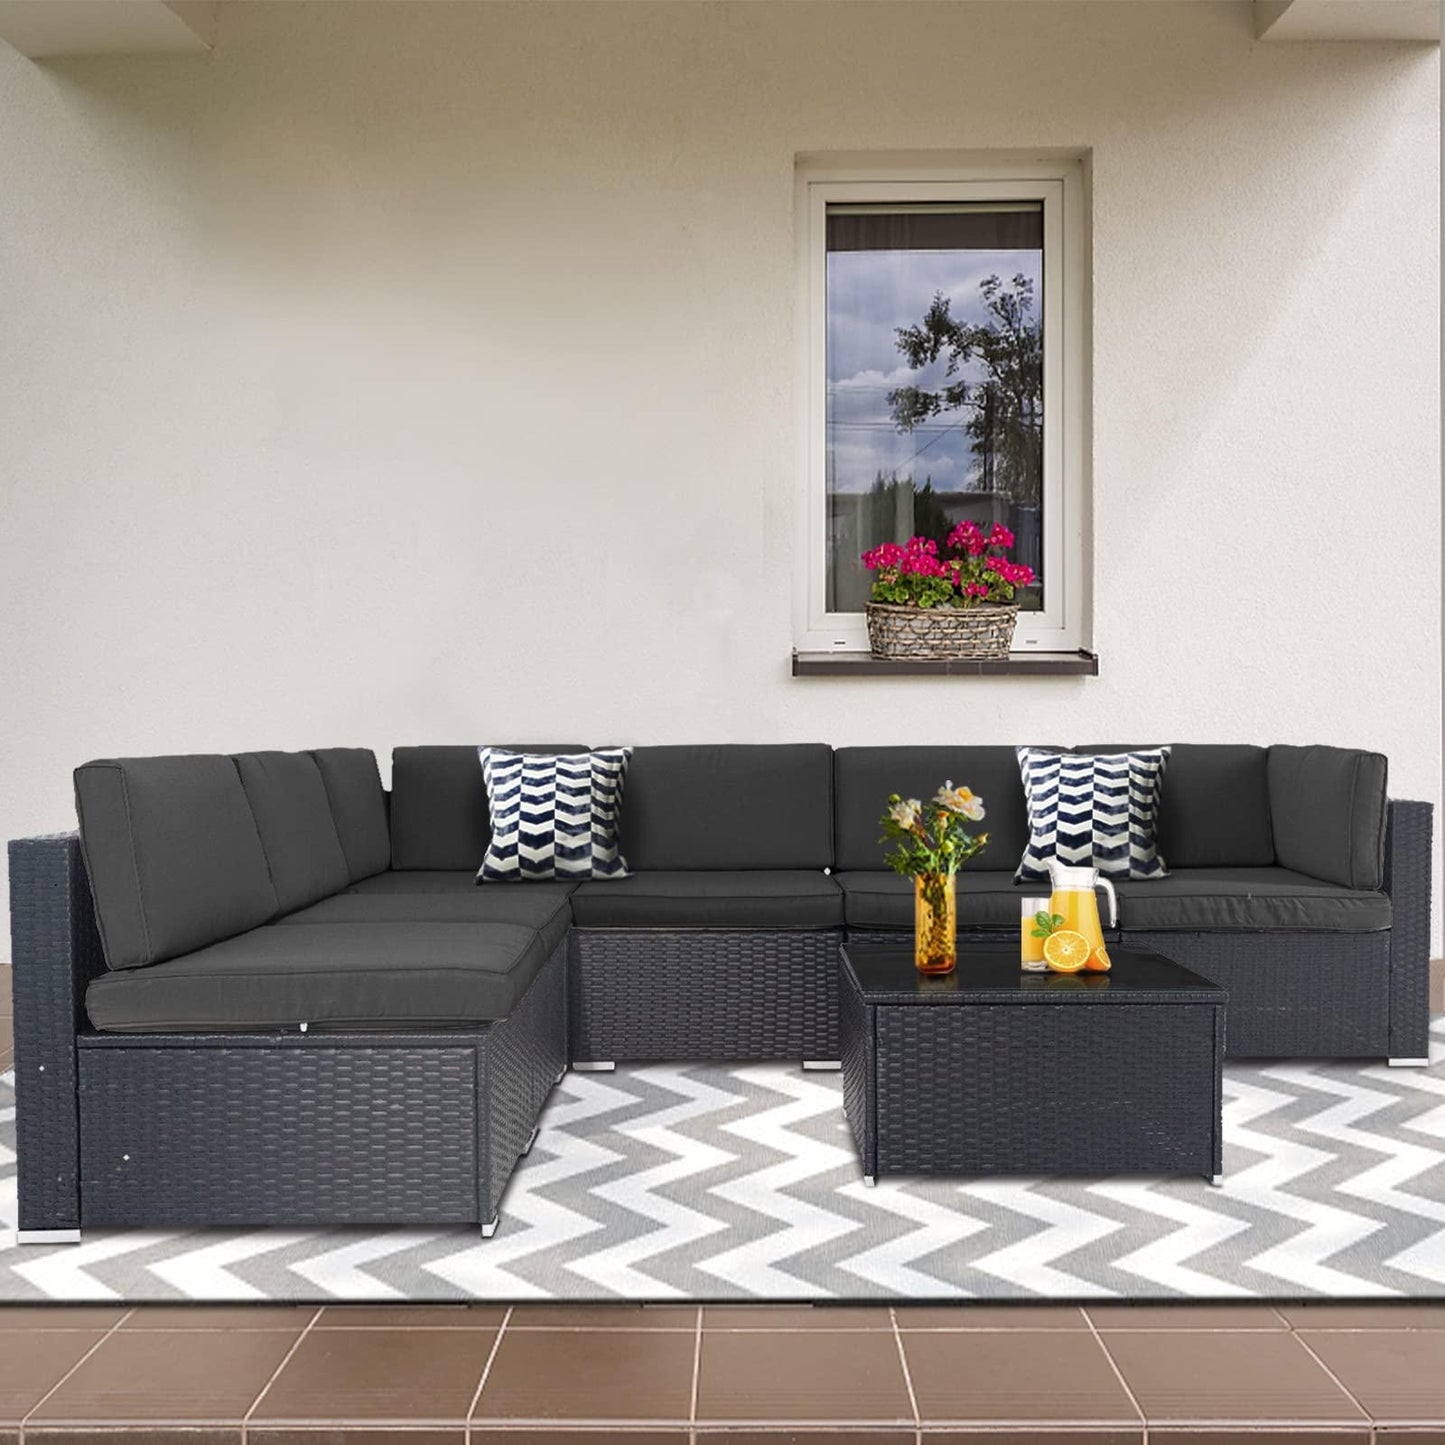 Crownland 7-Piece Outdoor Patio Furniture Sets, All-Weather Black Wicker Rattan Sectional Sofa, Modern Glass Coffee Table and Washable Seat Cushion with YKK Zipper (Grey) - CookCave